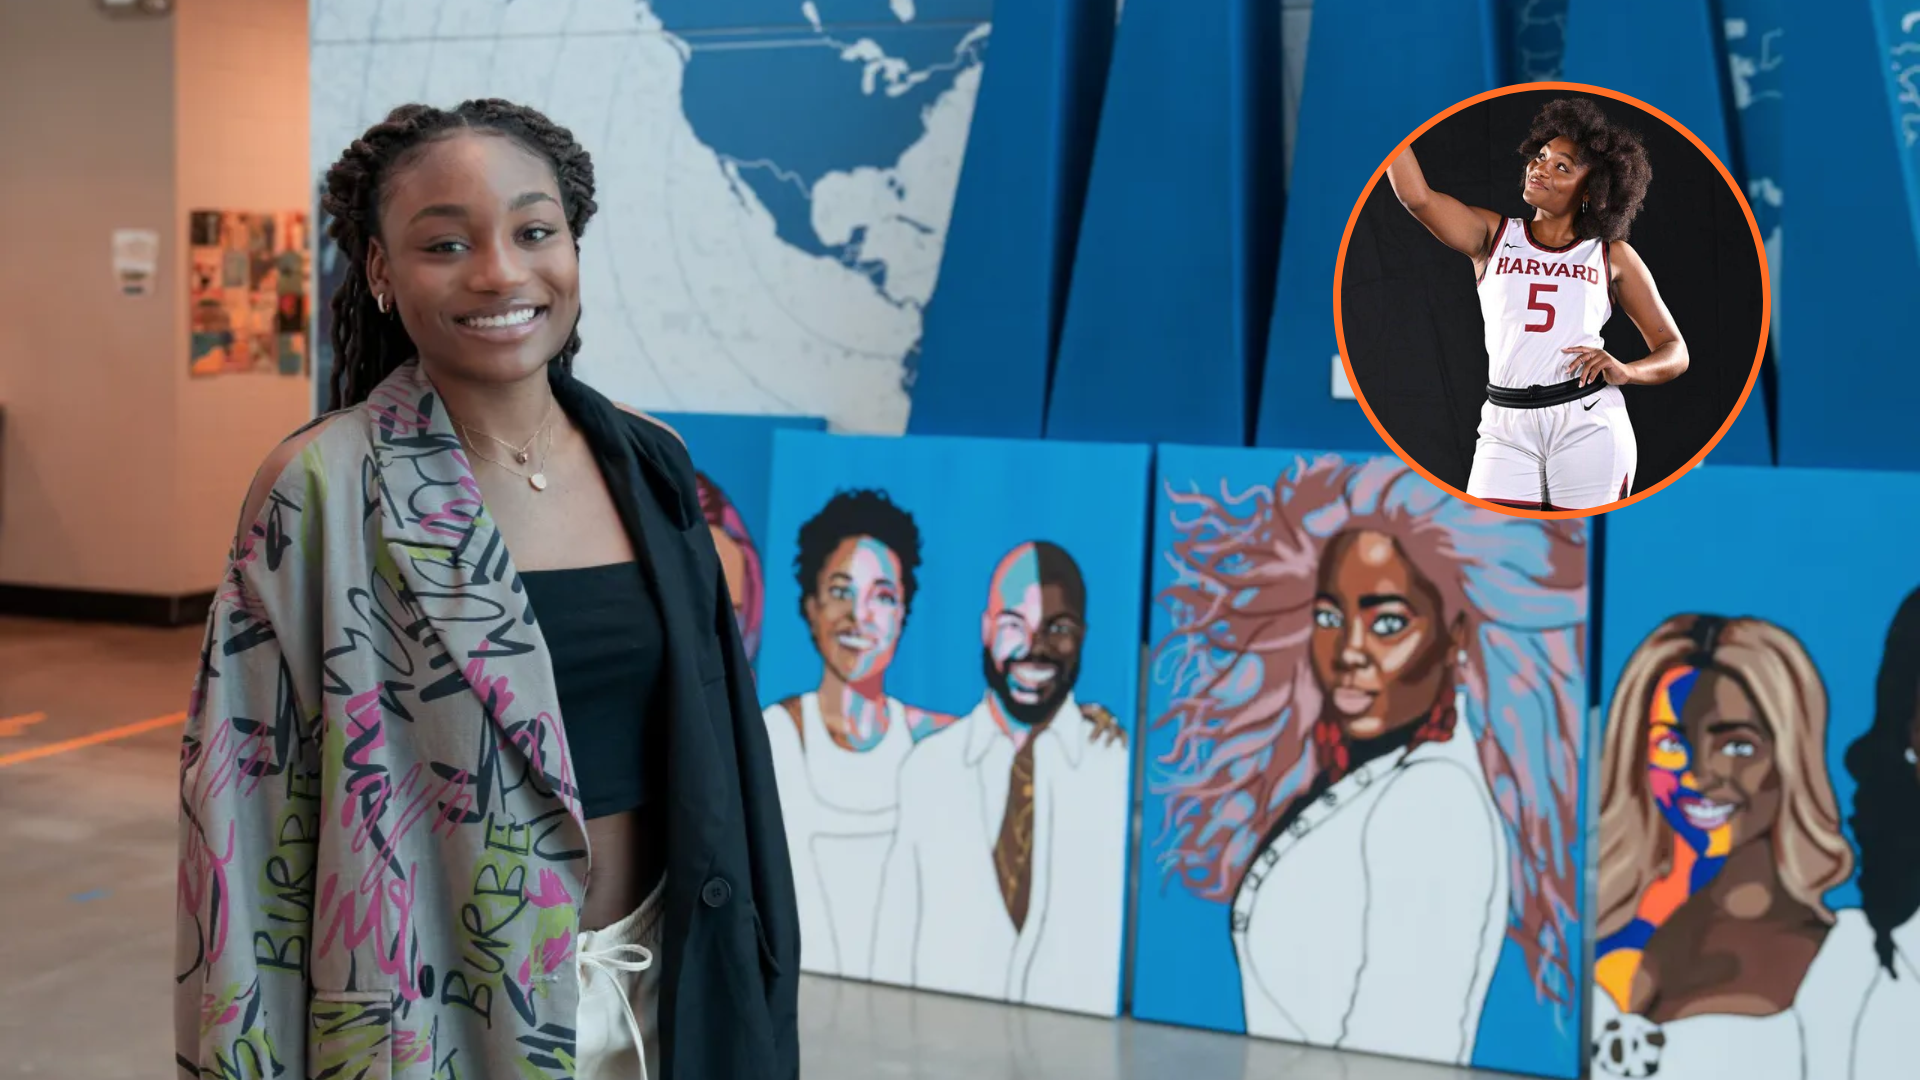 Meet The 20-Year-Old Artist, Athlete, And Student Who Built a Lucrative Creative Empire